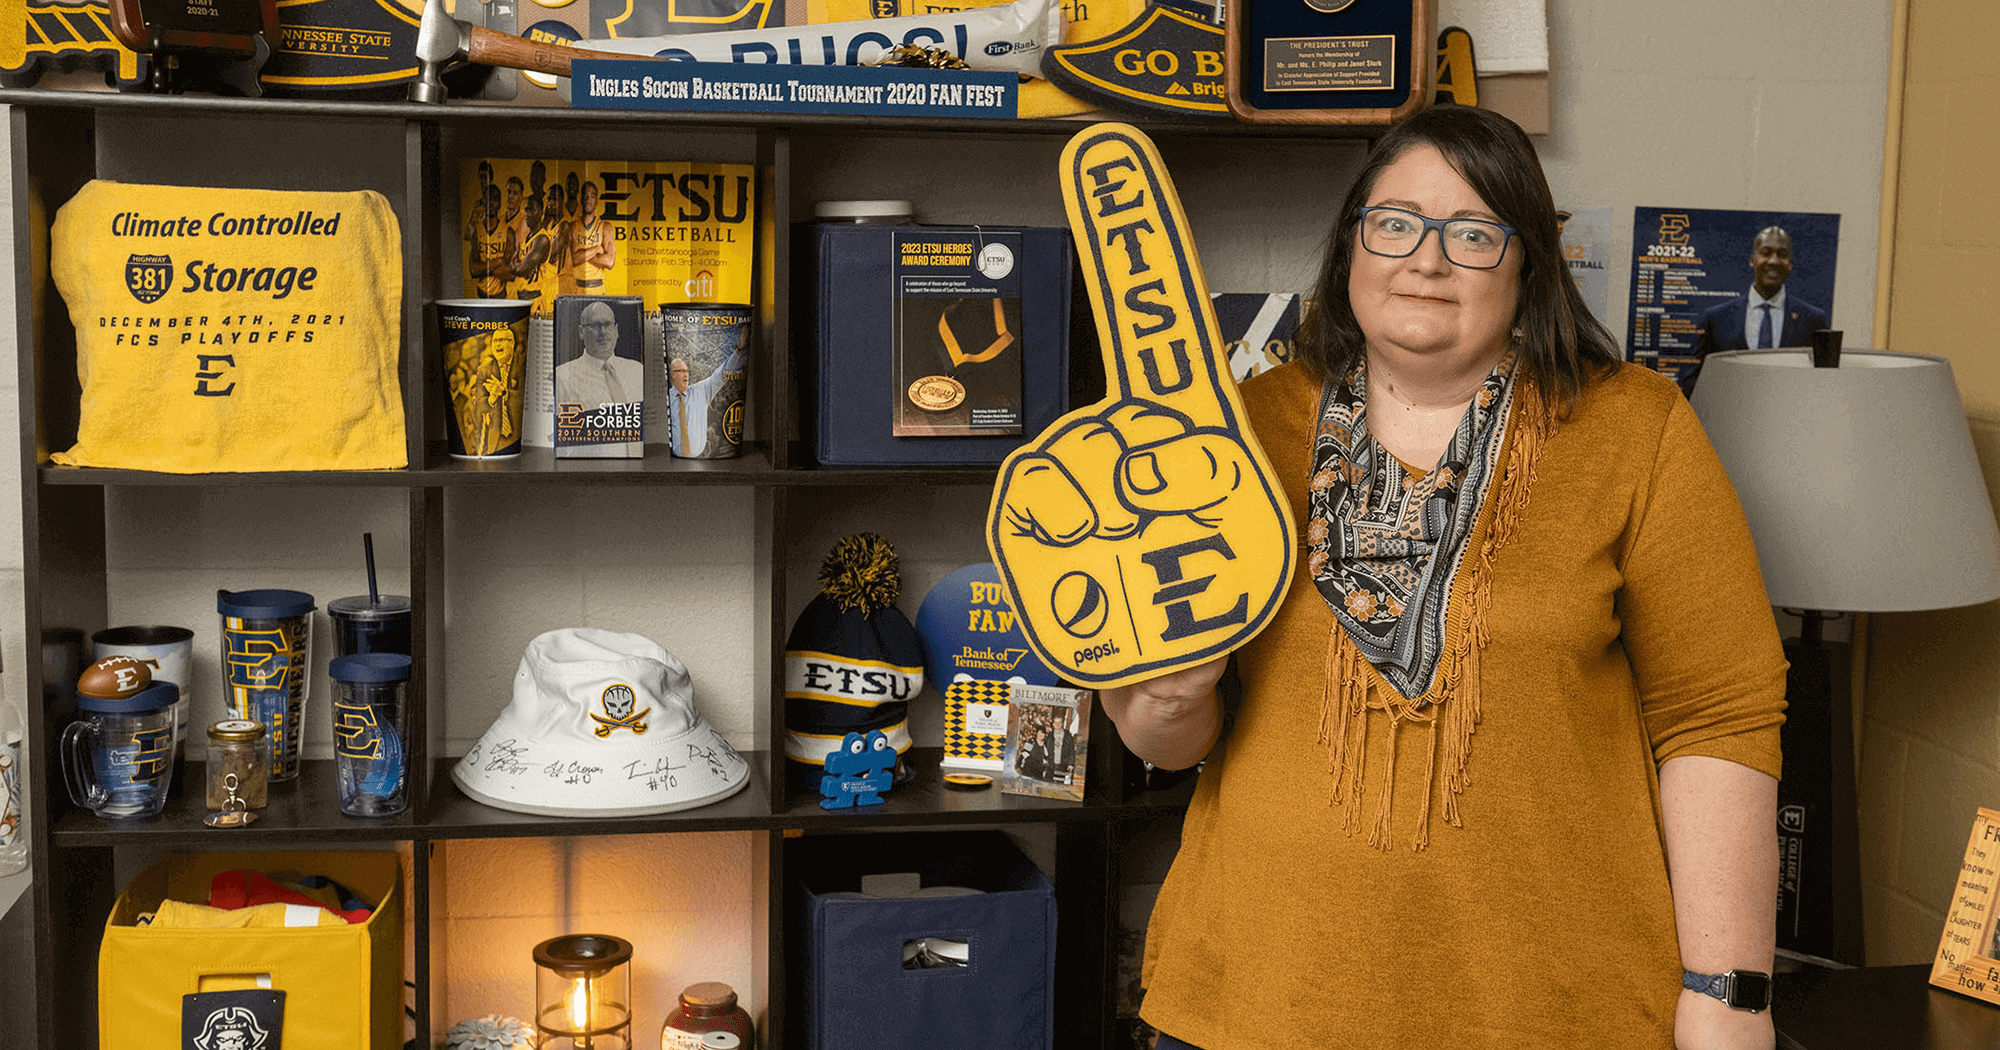 Janet Stork shares some of the Buccaneer gear and memorabilia she proudly displays in her office in the College of Public Health Dean’s Office.